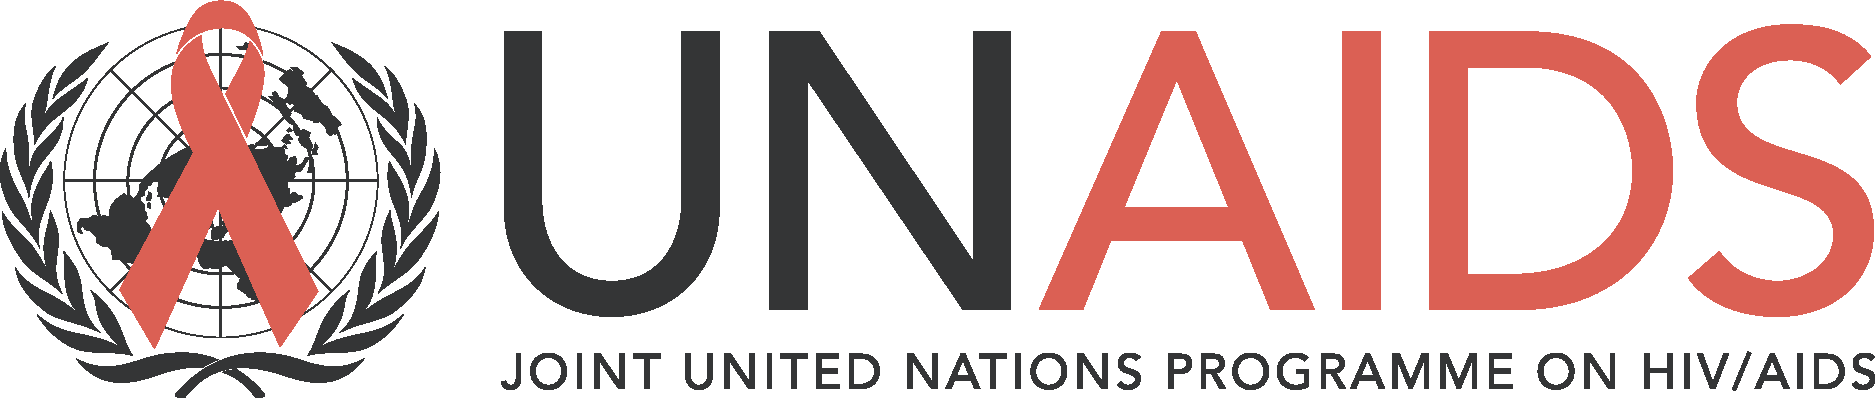 Unaids Oint United Nations Programme On Hiv Aids Logo Vector